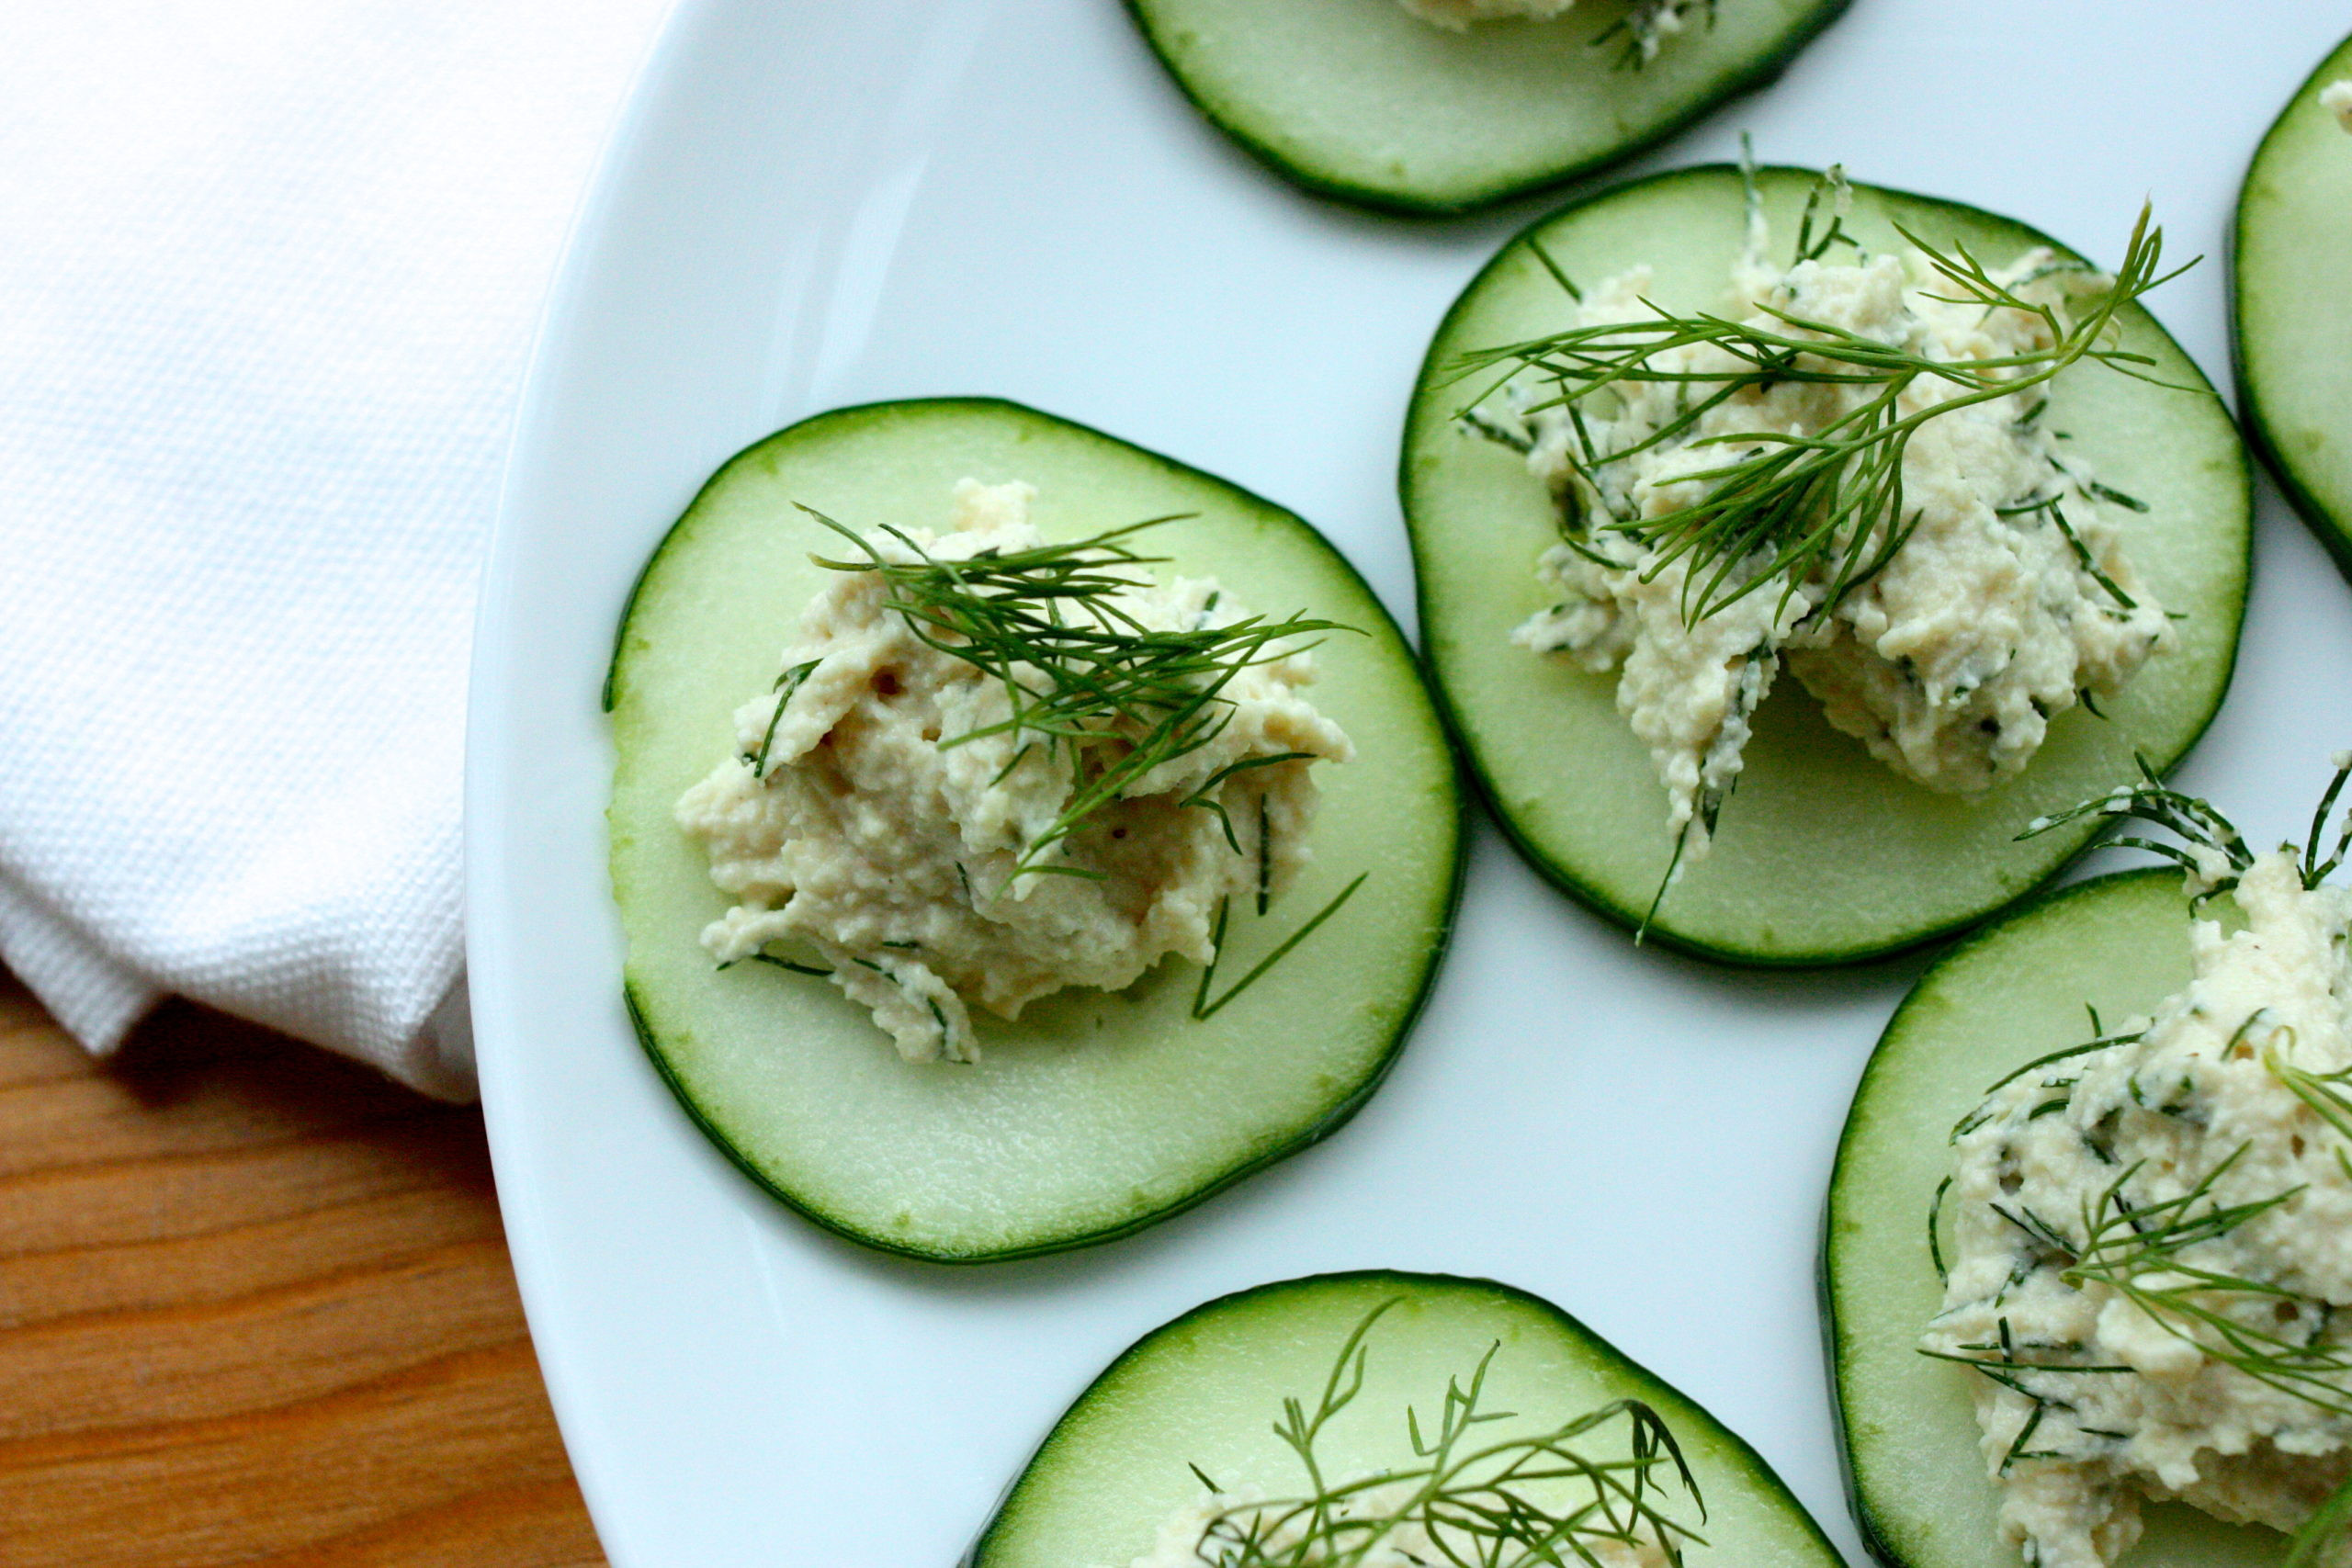 Cucumber Appetizers With Dill And Cream Cheese
 Seasonal Appetizer Cucumber Rounds with Raw Herbed Dill